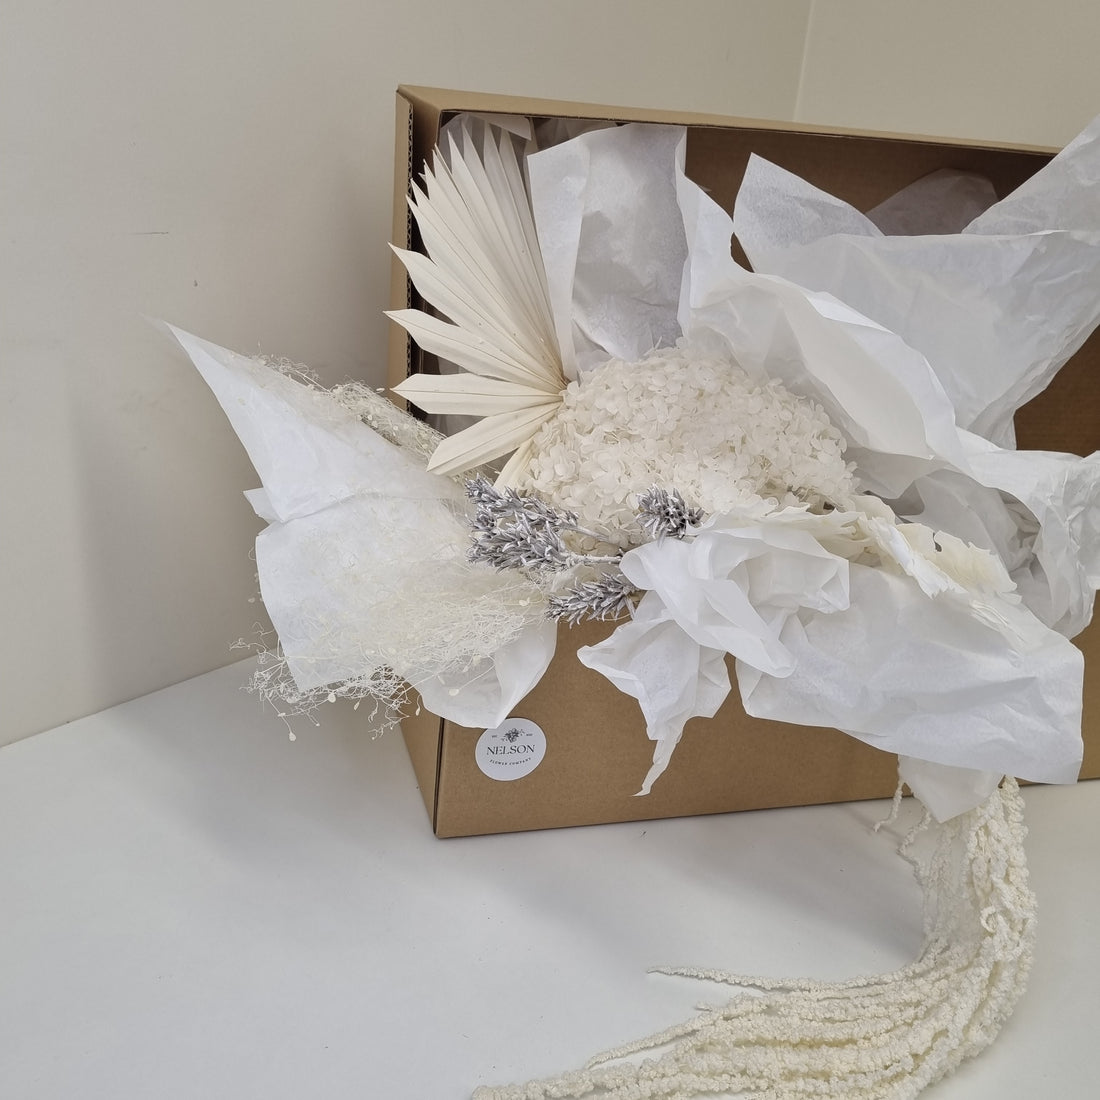 Snow White Dried Flower Box in cardboard box with white tissue paper.